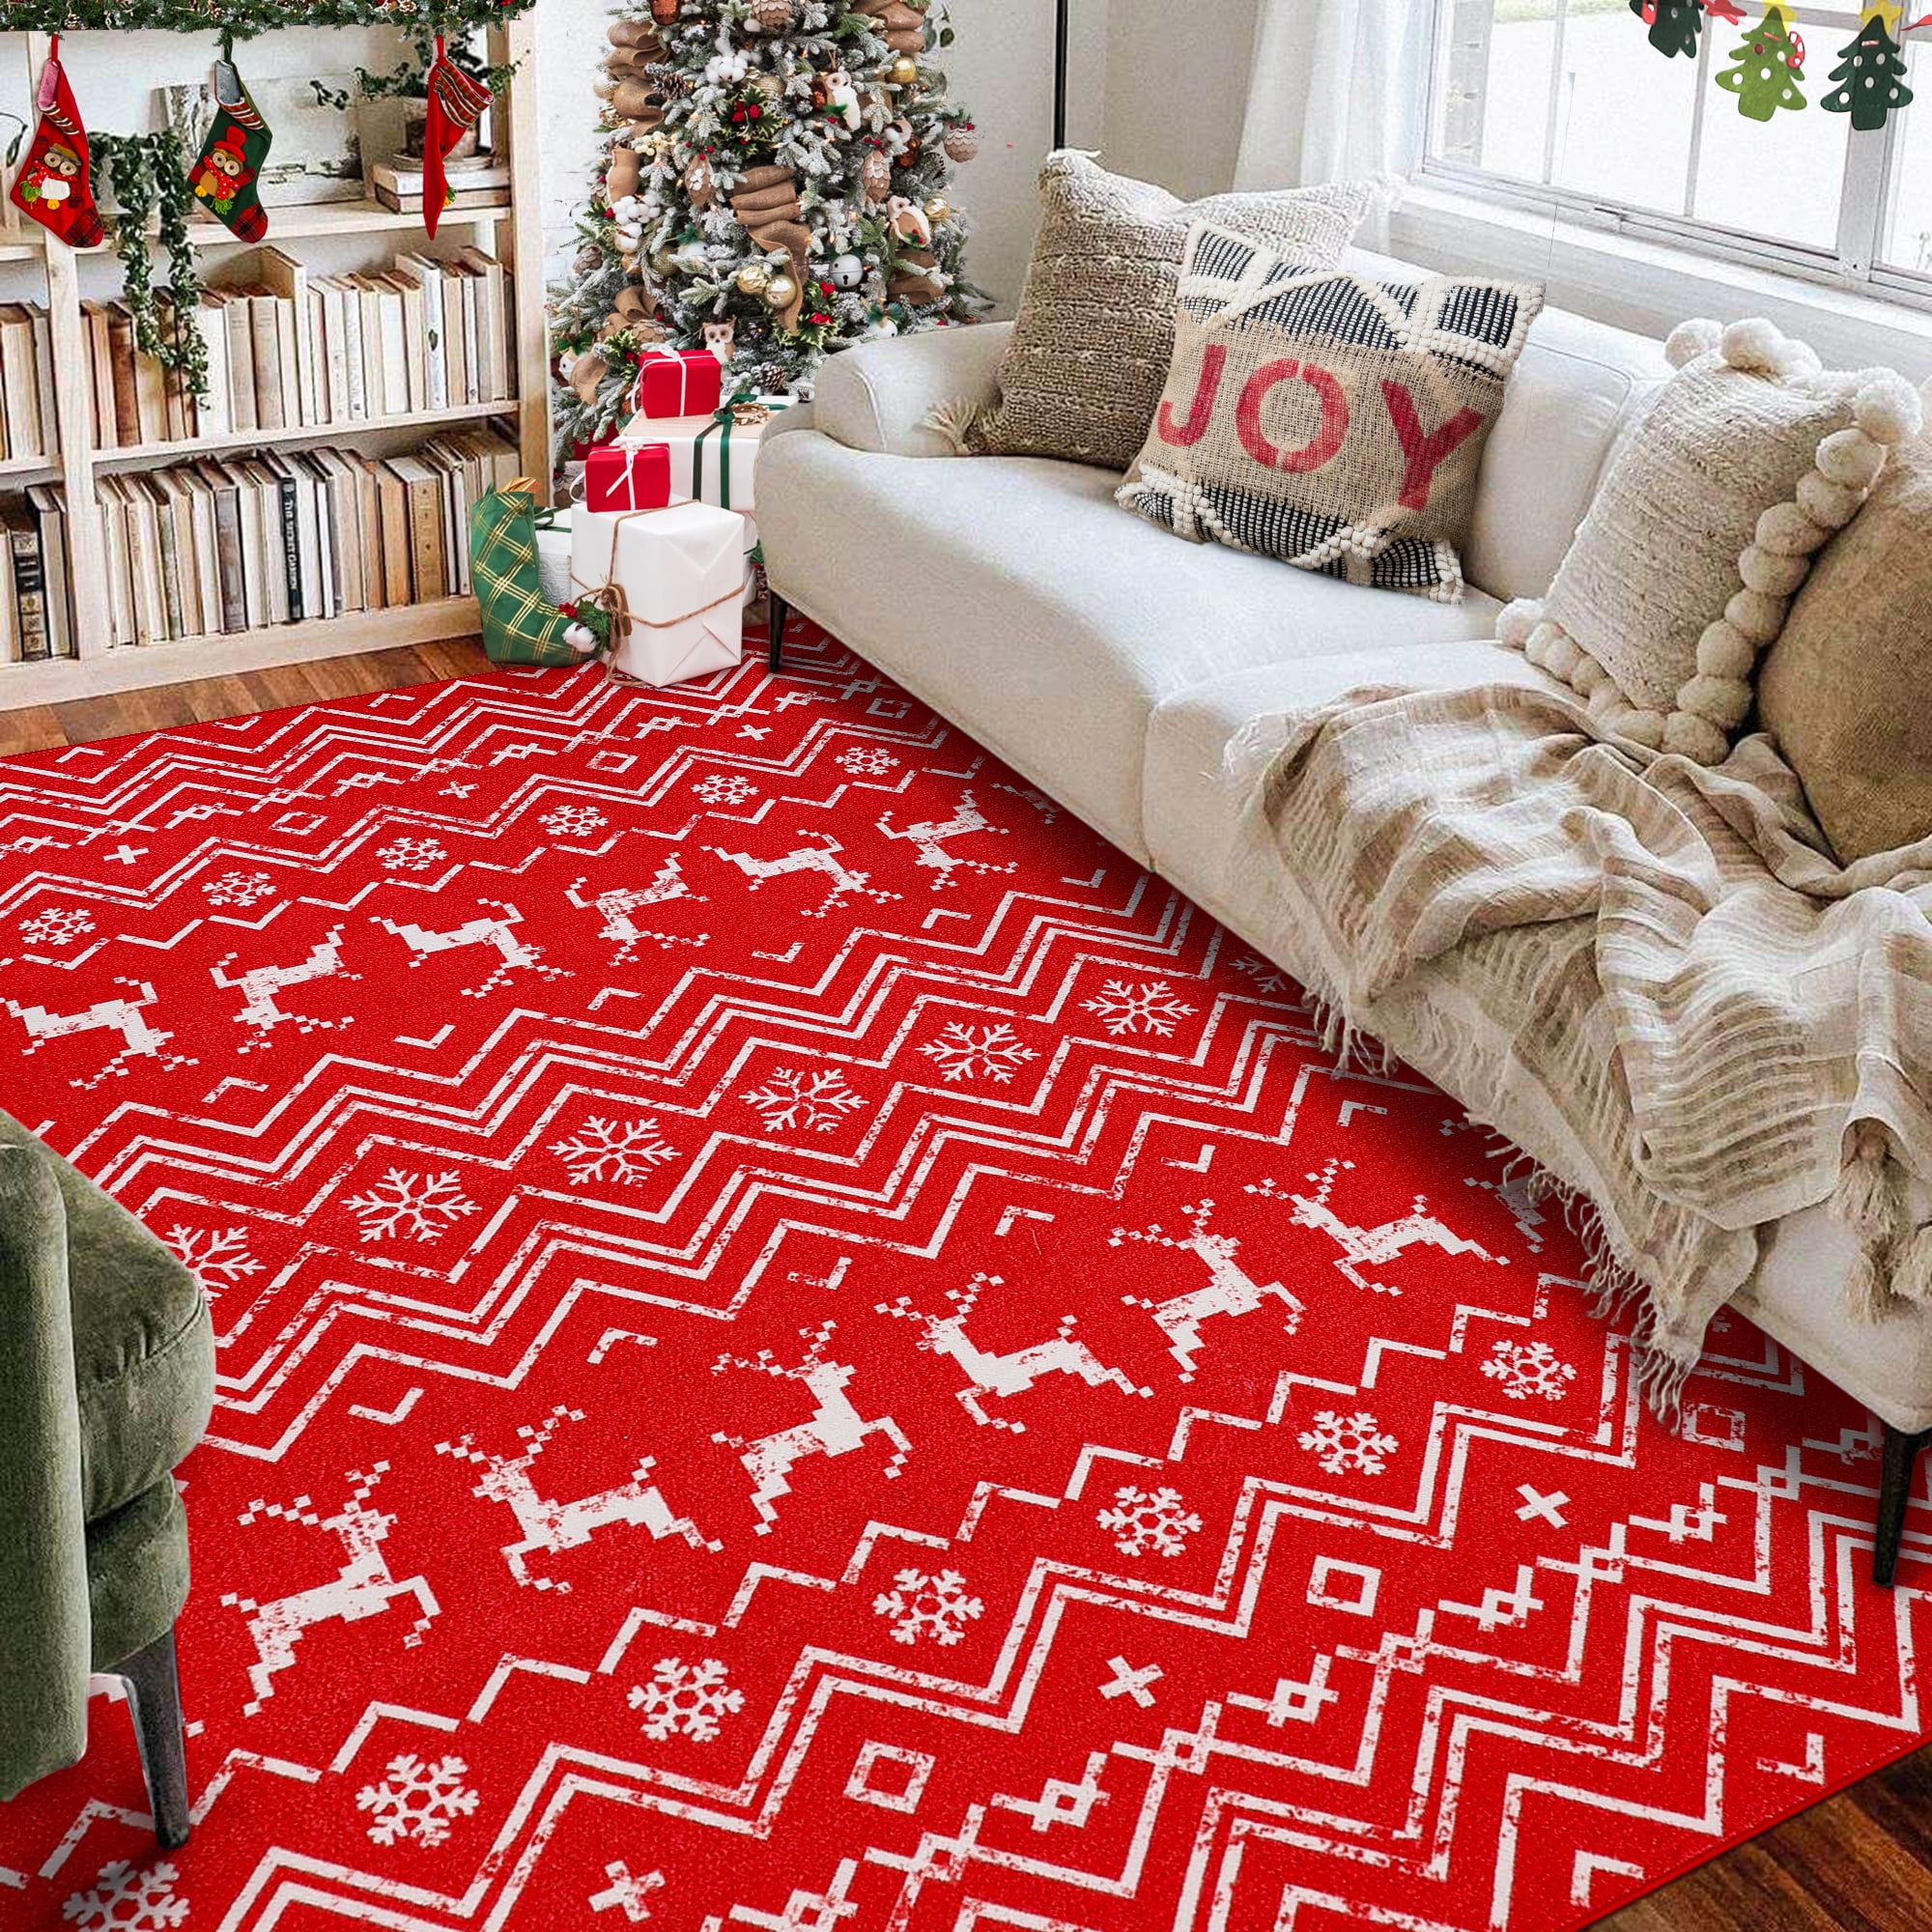 Uphome Christmas Area Rug 3x5, Red Washable Indoor Entryway Rug, Urtra-Thin  Soft Non-Slip Winter Snowflake Holiday Rug, Cute Christmas Tree Floor